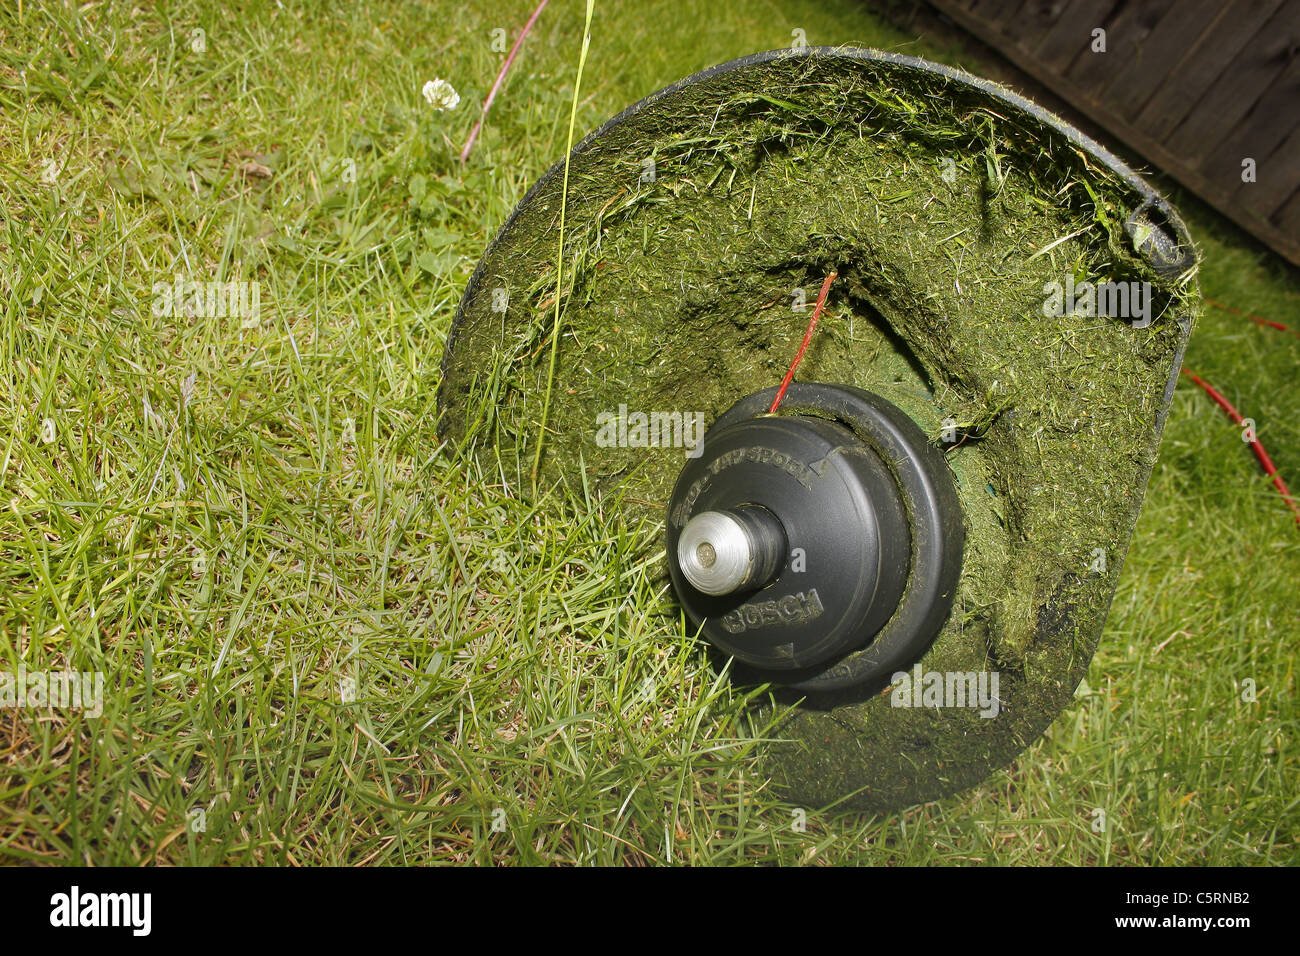 image of base of strimmer on lawn Stock Photo